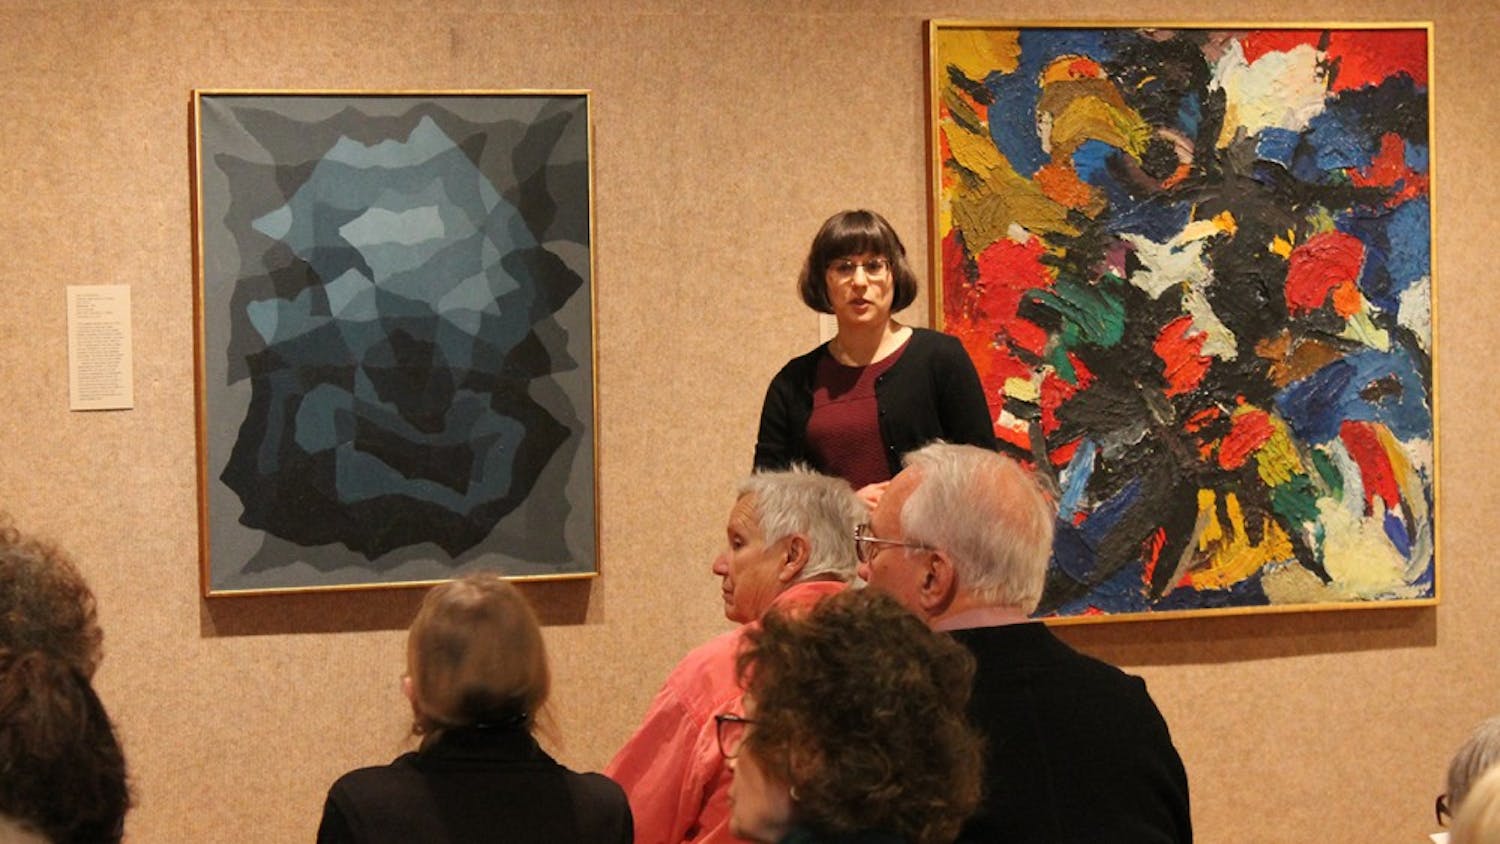 Jenny McComas, class of 1949 curator of European and American art at the Eskenazi Museum of Art, talks about post war West German abstract paintings. "The Politics of Abstract Painting in Postwar Germany" was the second presentation during the museum's Noon Talk series. The next event will be held at 12:15 p.m. on March 29 in the Eskenazi Museum of Art.
